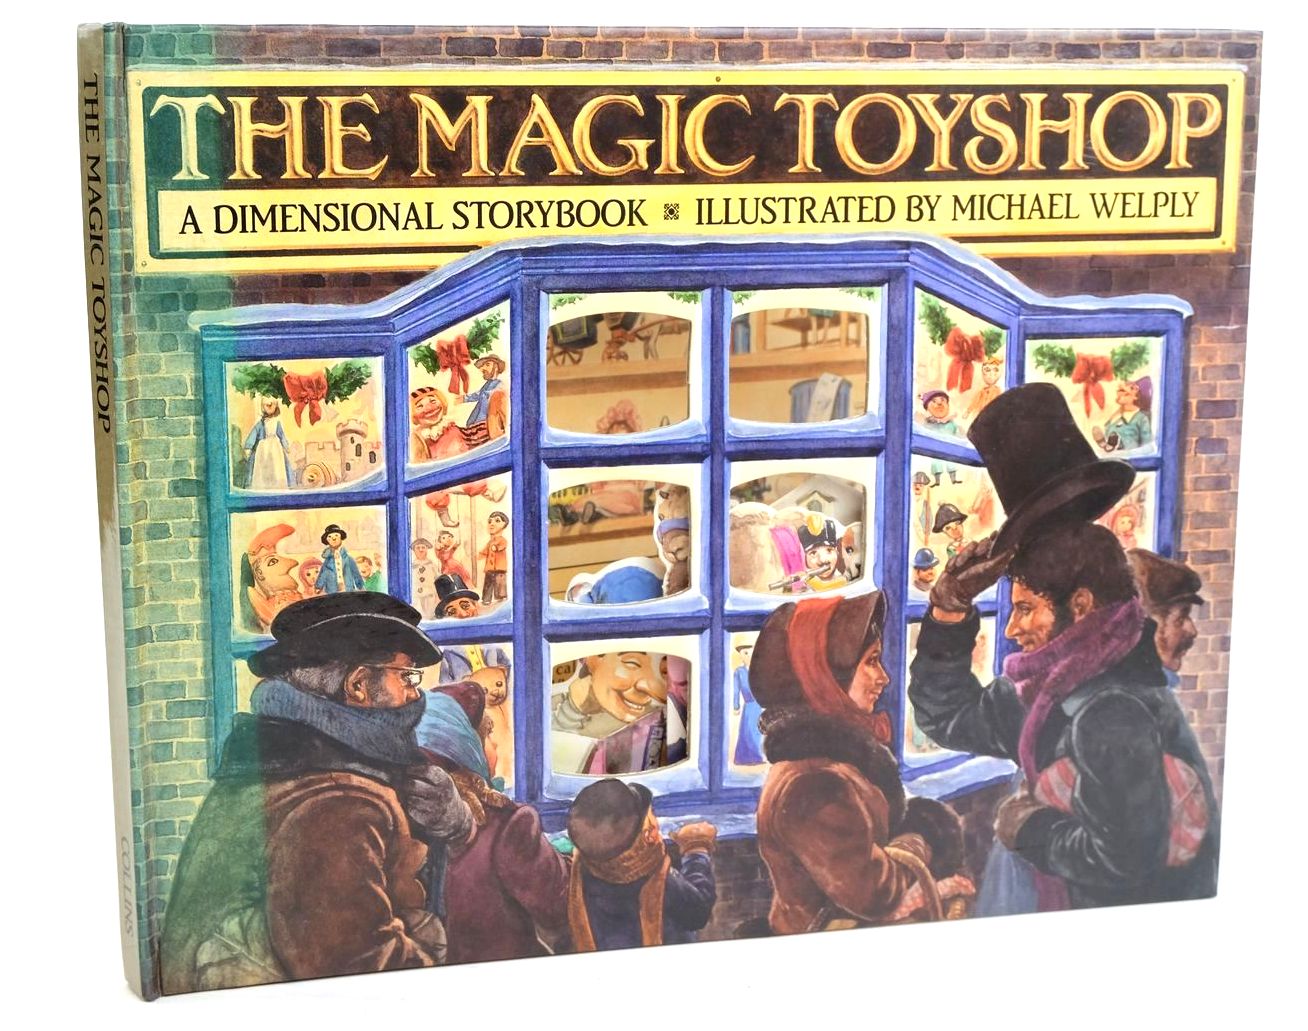 Photo of THE MAGIC TOYSHOP written by Seymour, Peter illustrated by Welply, Michael published by William Collins Sons &amp; Co. Ltd. (STOCK CODE: 1319996)  for sale by Stella & Rose's Books